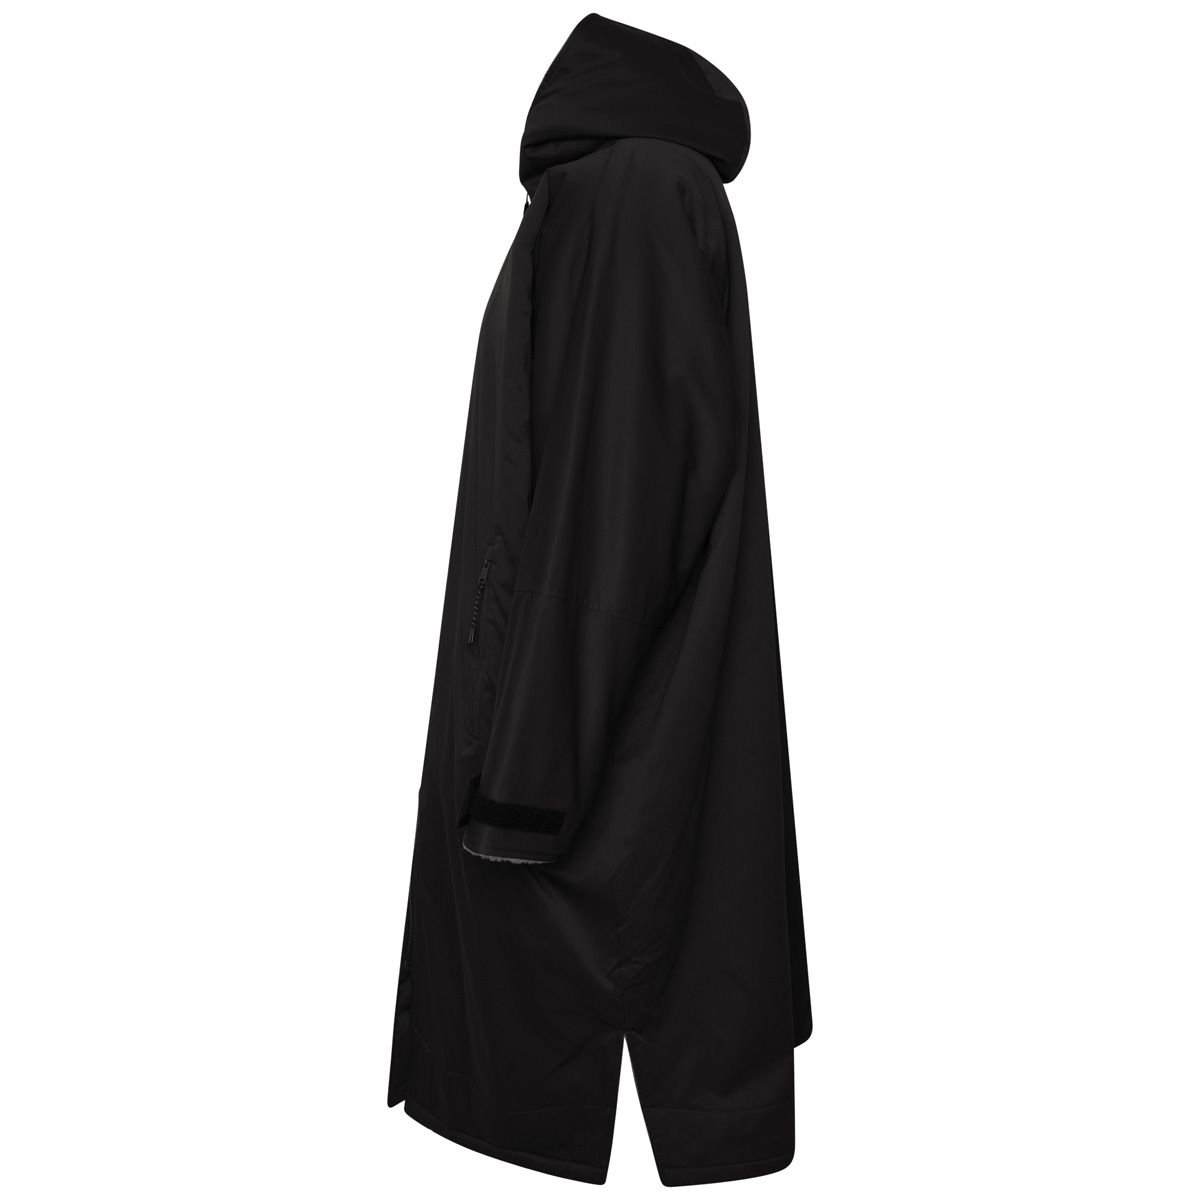 THERMAL ROBE BLK SIDE